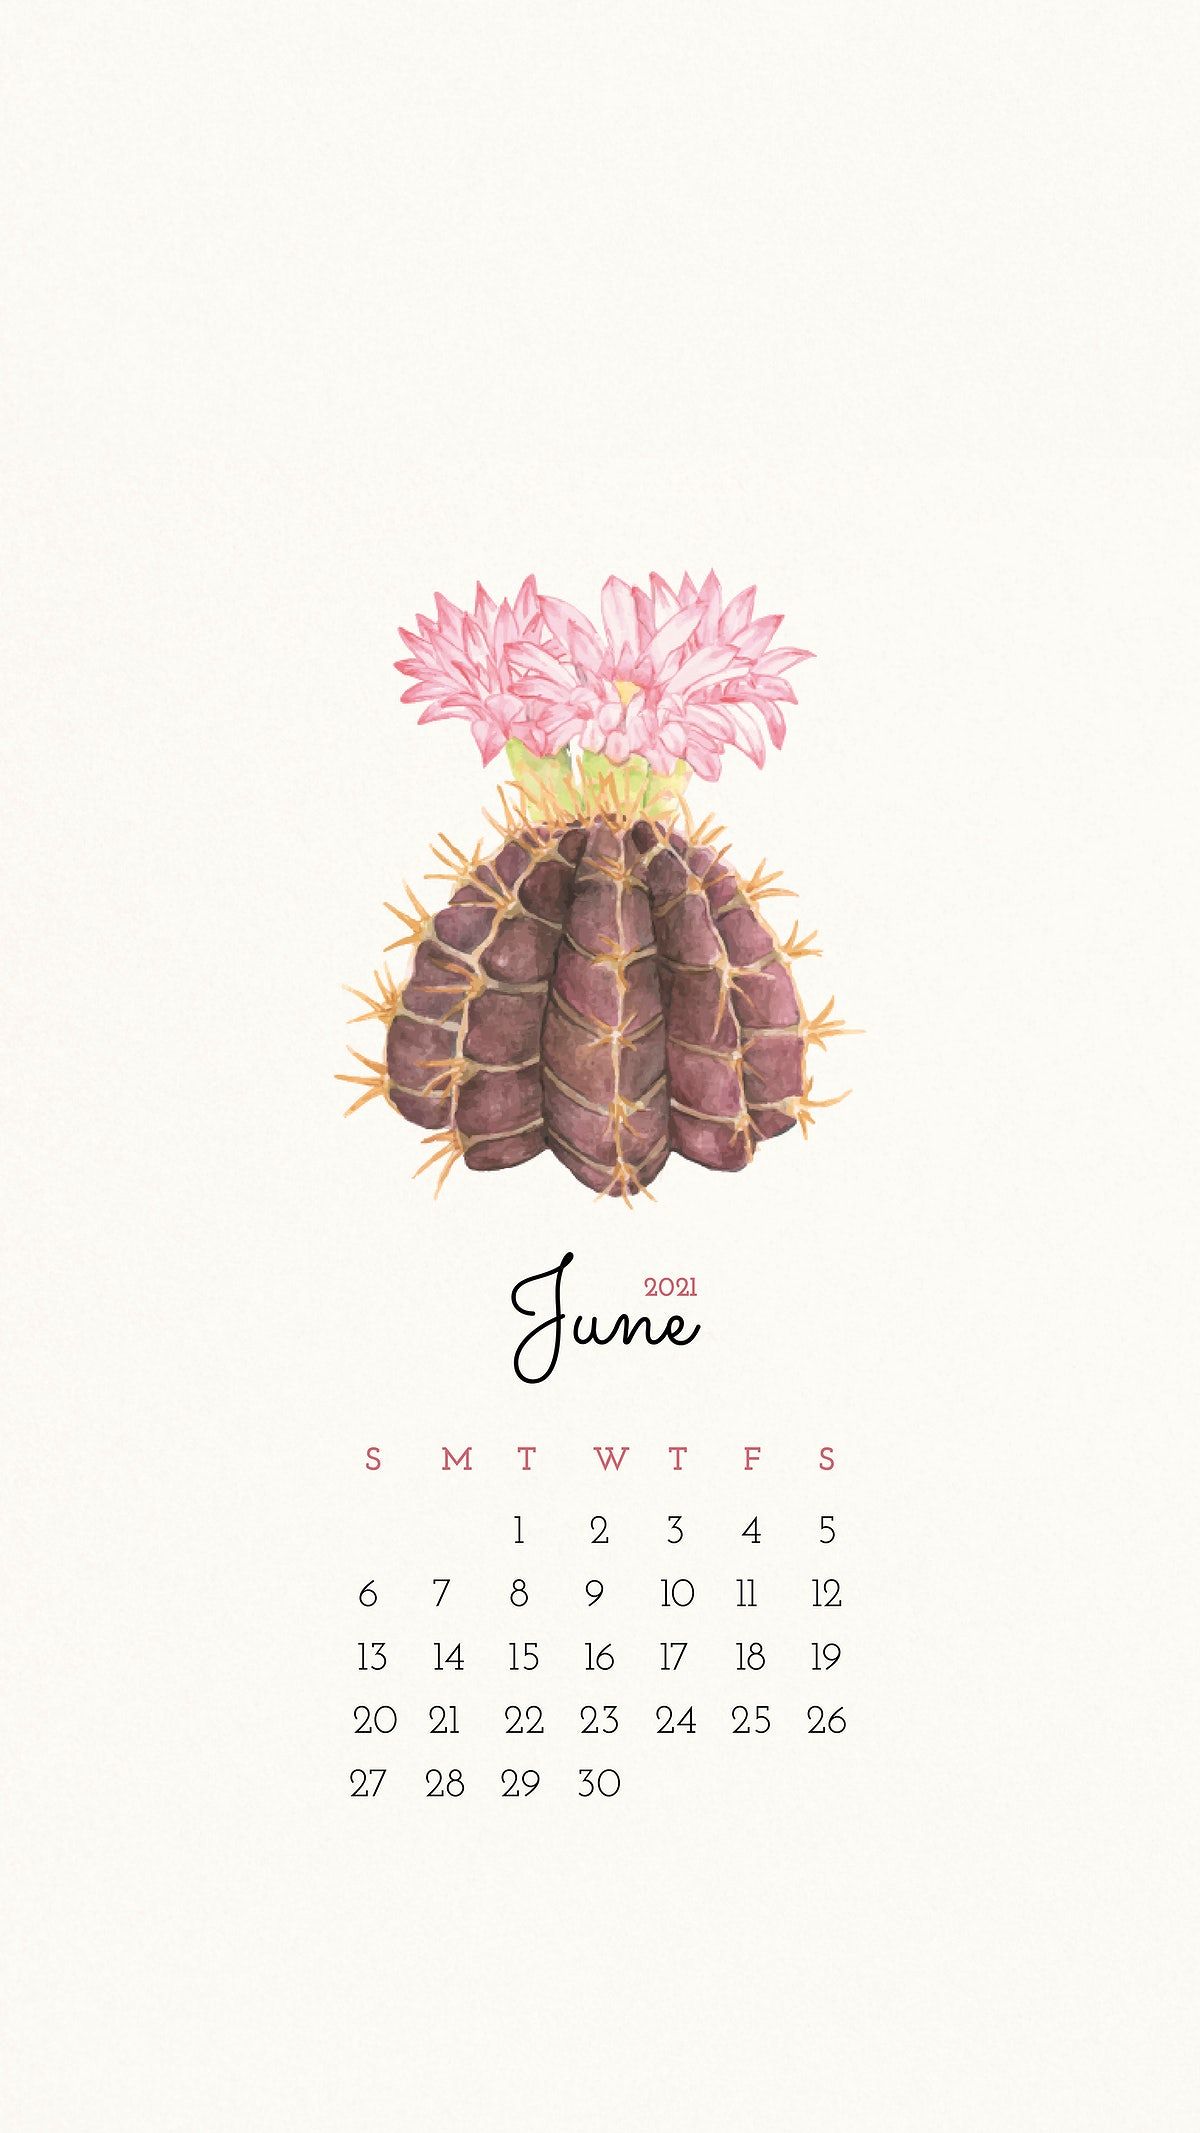 Calendar 2021 June printable with cute hand. Free stock illustration. High Resolution graphic